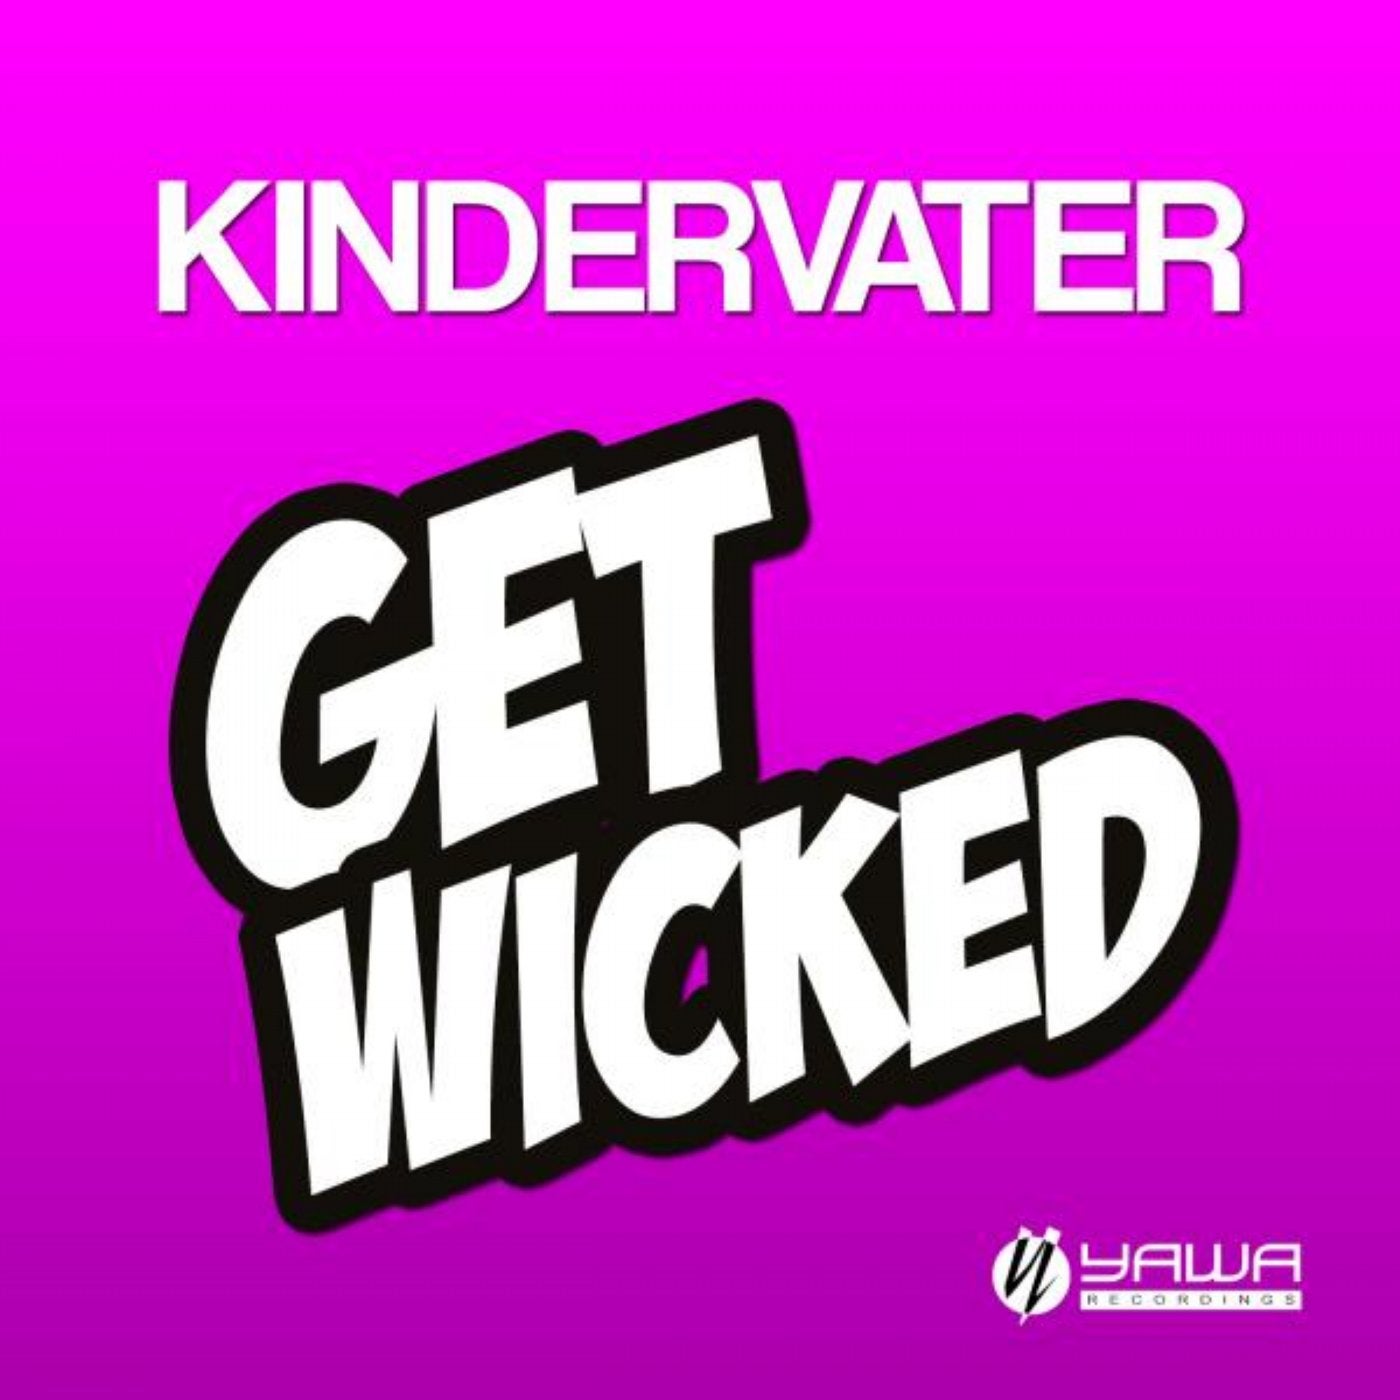 Get Wicked